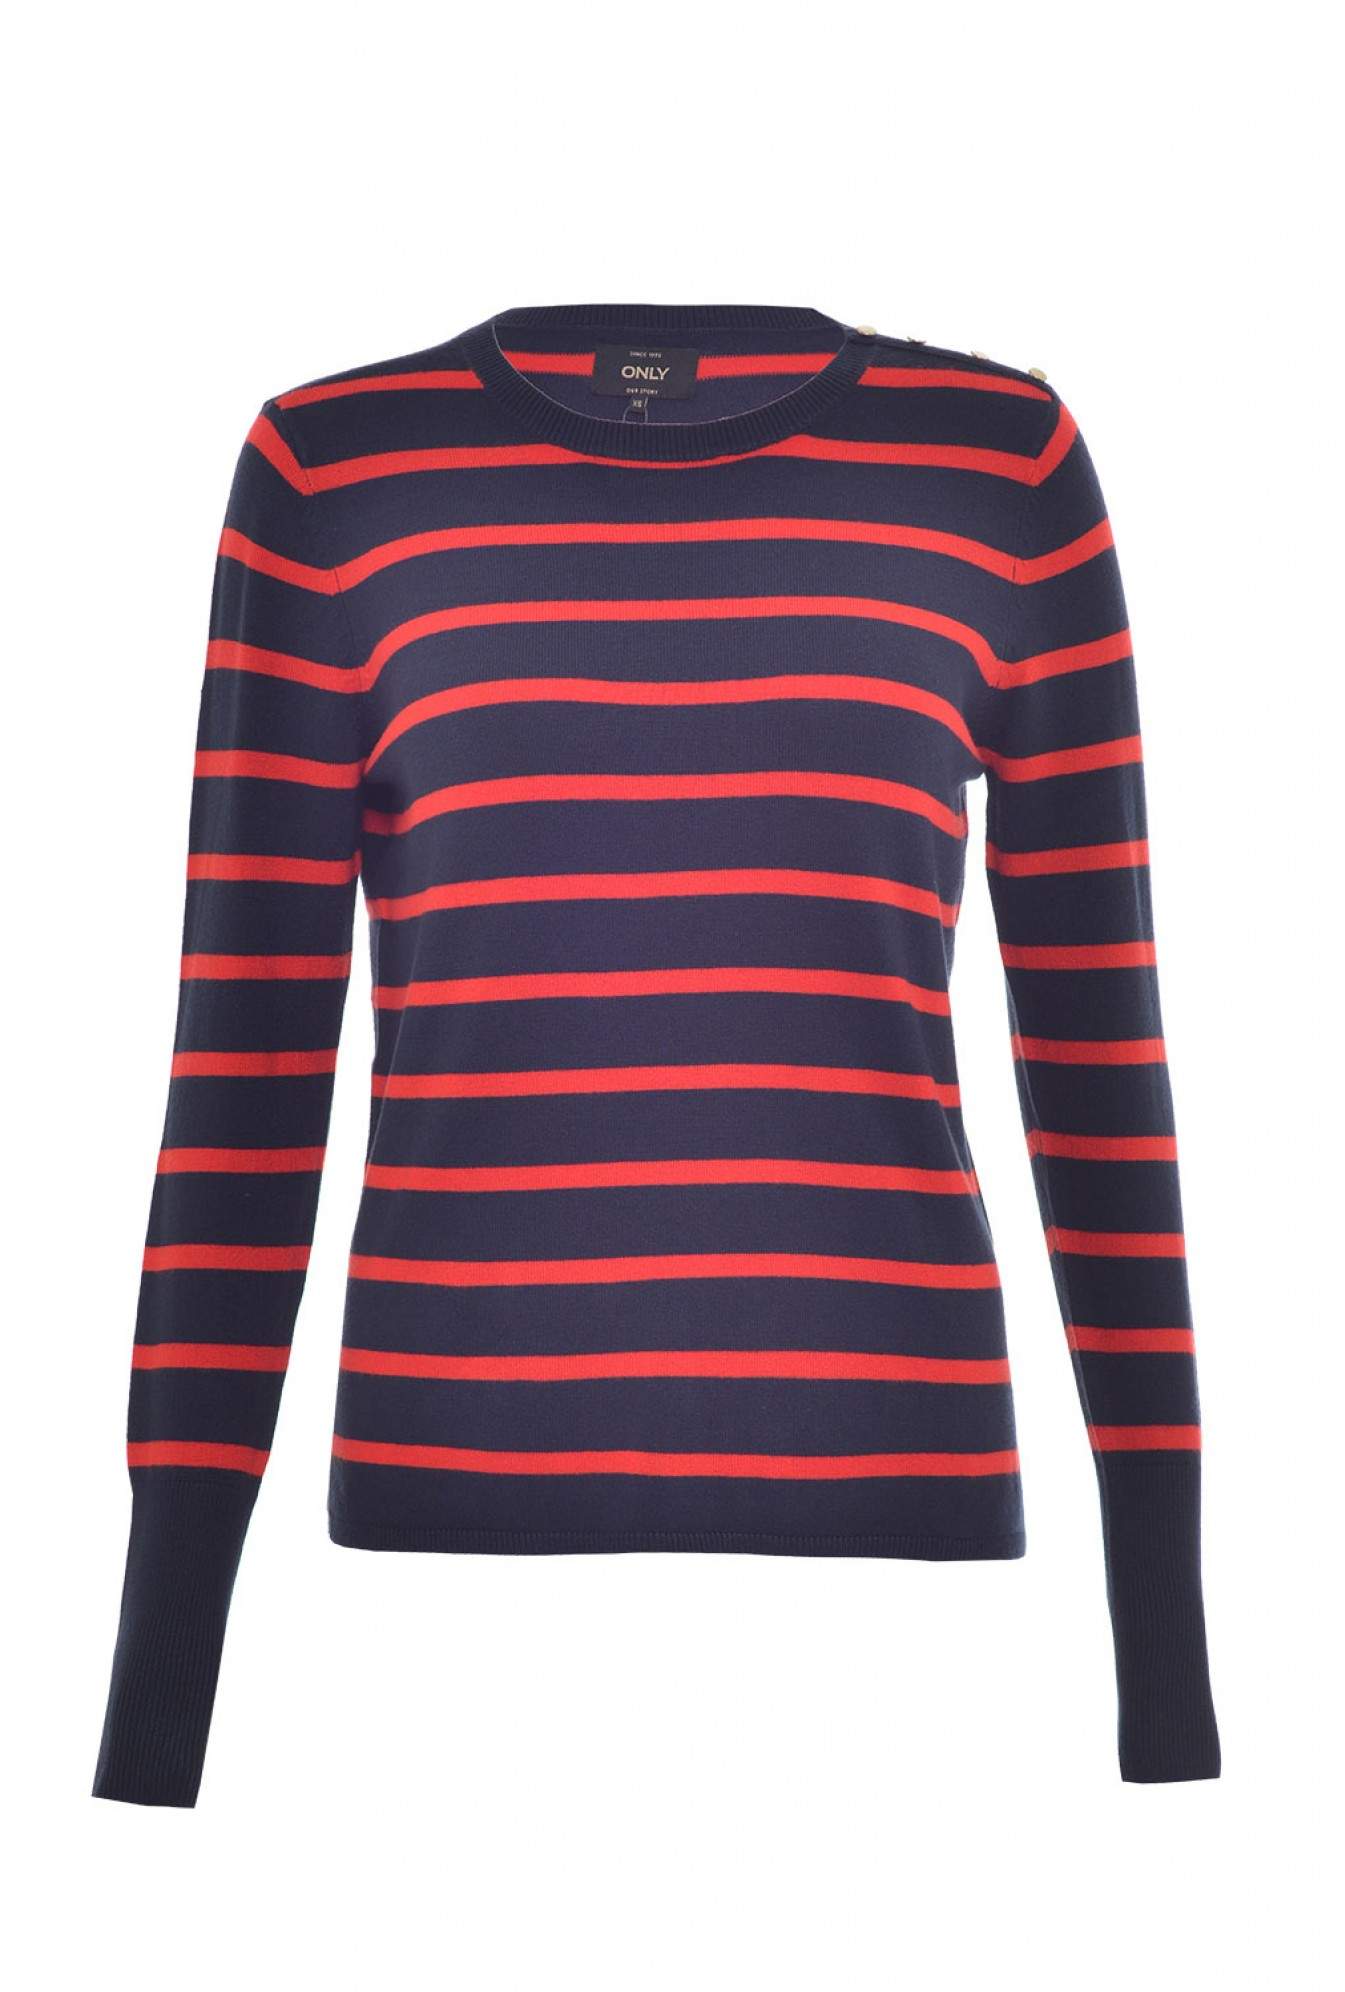 Only Dina L/S Stripe Pullover Knit in Red Stripe | iCLOTHING